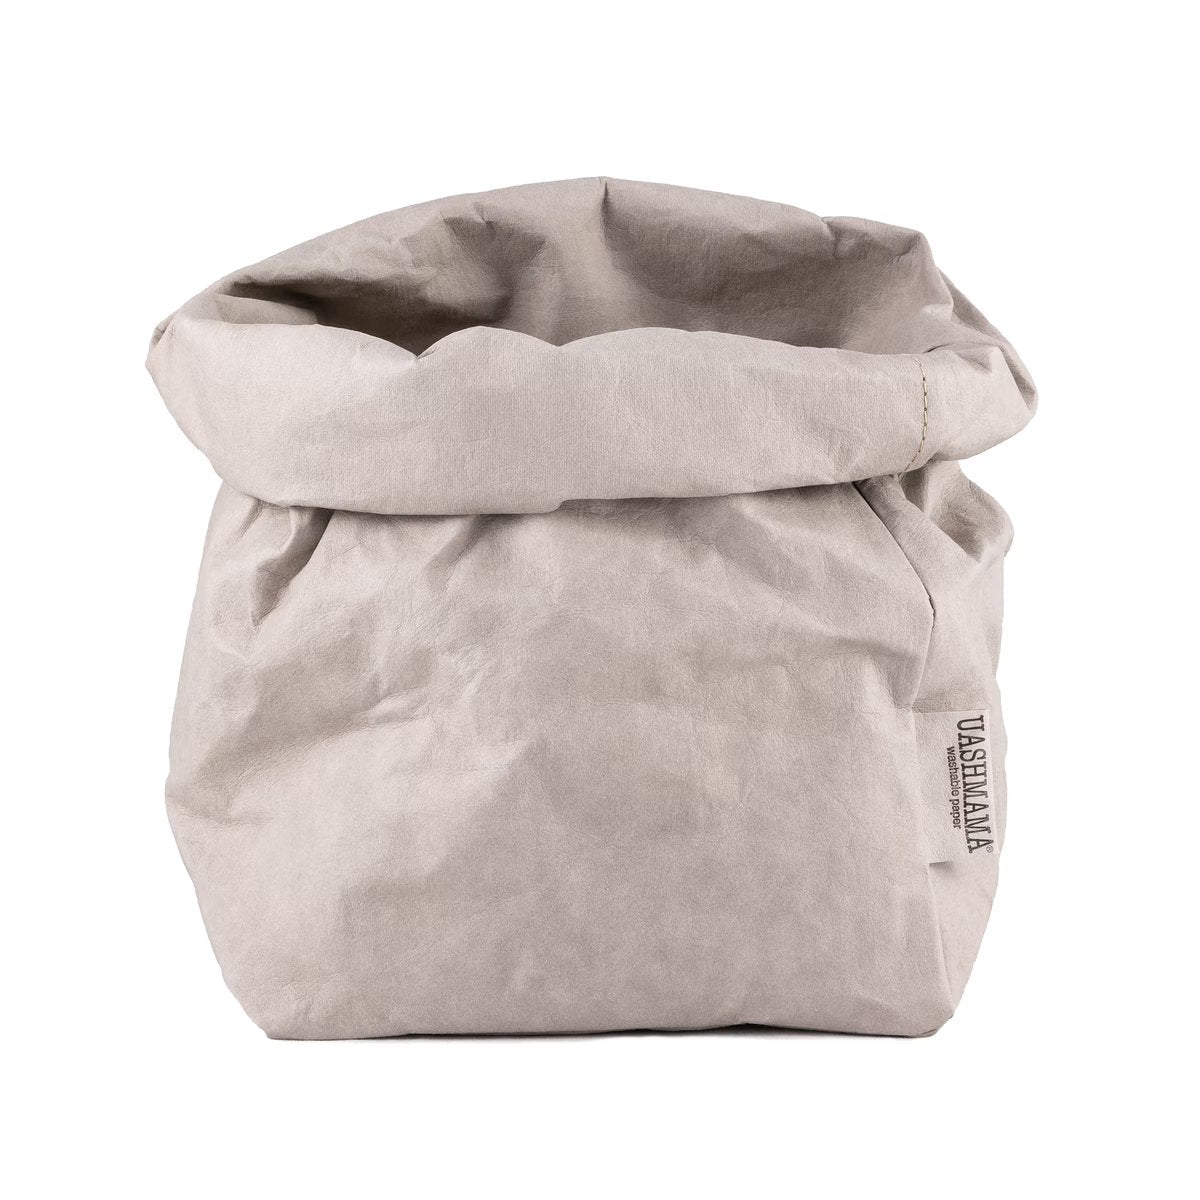 A washable paper bag is shown. The bag is rolled down at the top and features a UASHMAMA logo label on the bottom left corner. The bag pictured is the large plus size in pale grey.